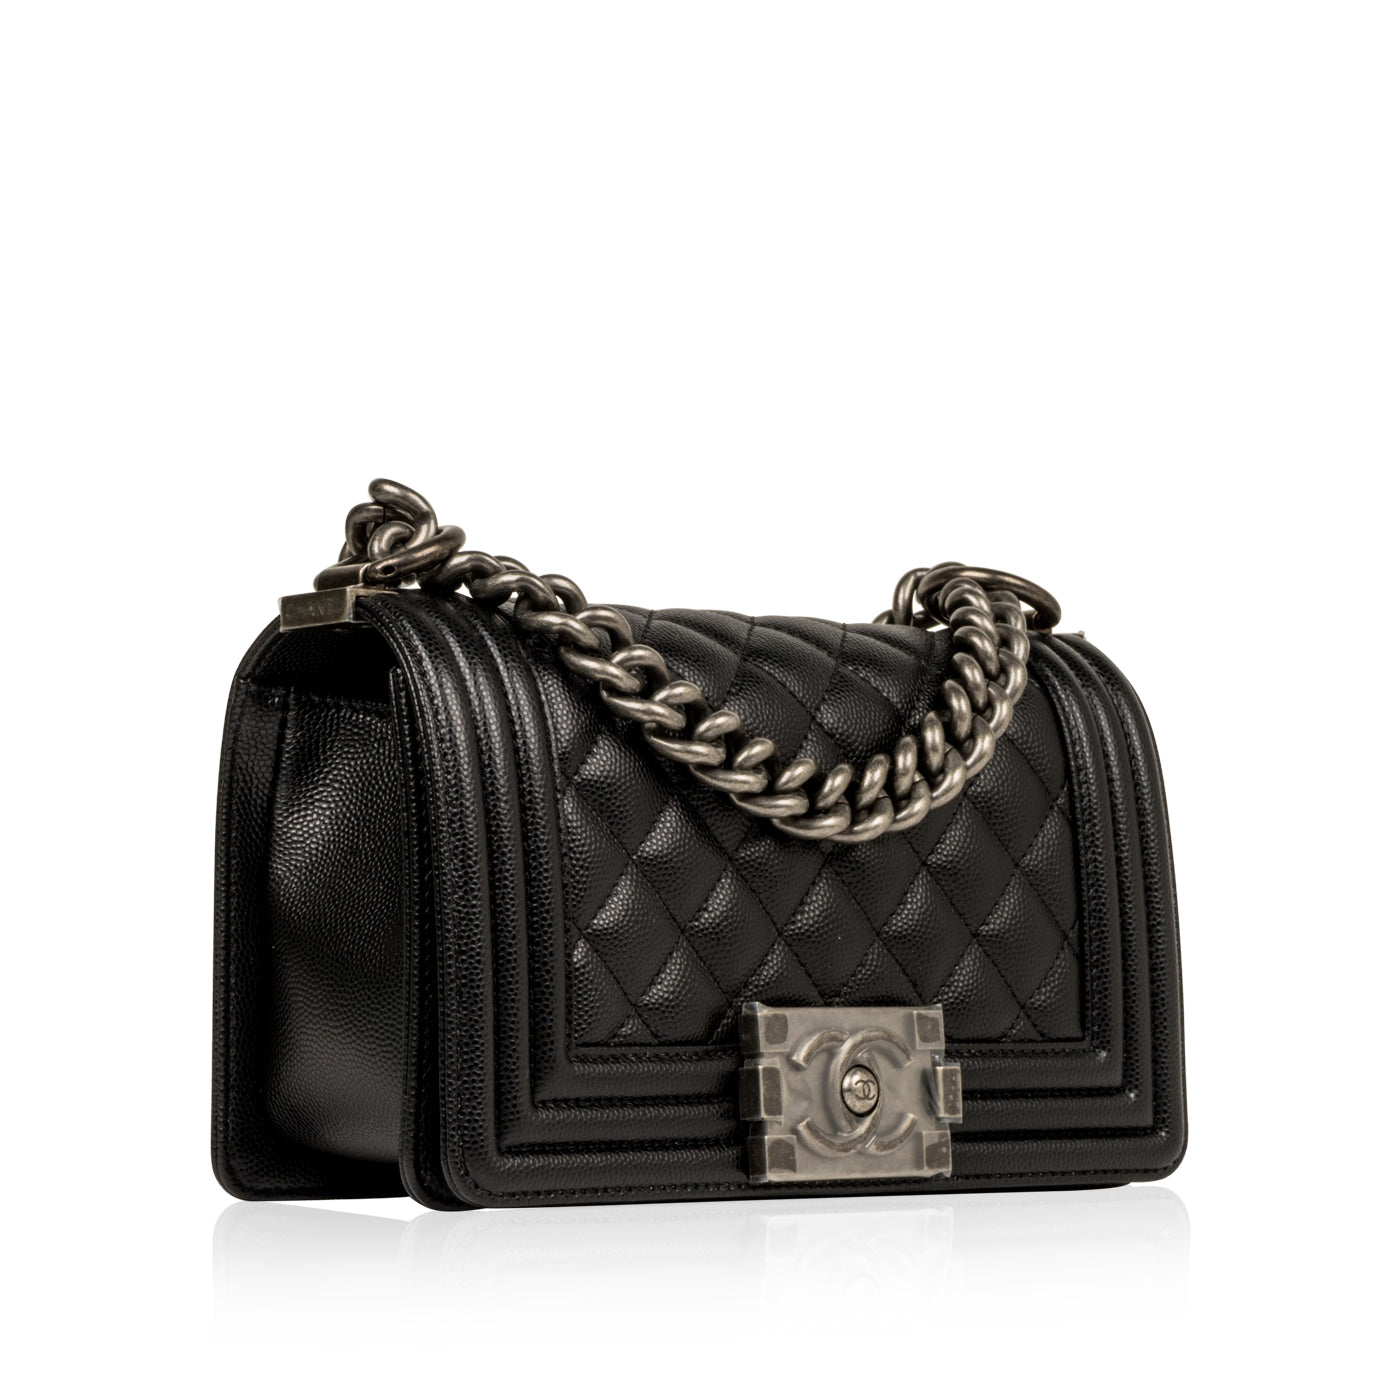 Chanel Boy & Chanel 19 Bag Size Guide – Coco Approved Studio